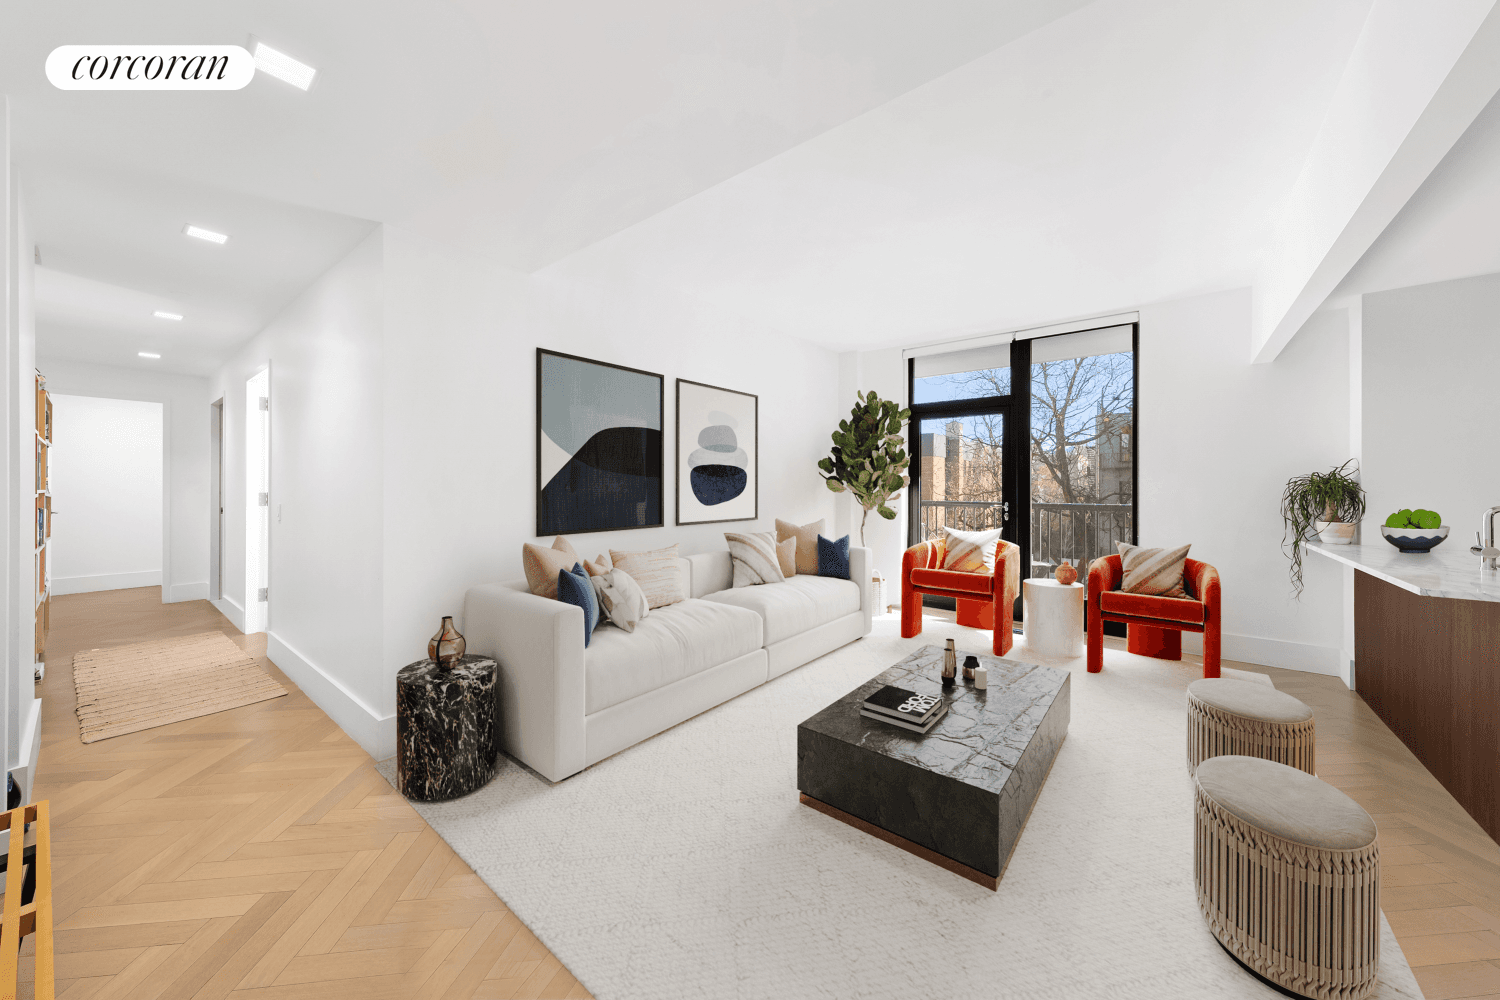 Residence 4D is a modern, bright two bedroom, two bathroom home with private outdoor space, located in a rare full service condo in the vibrant East Village.